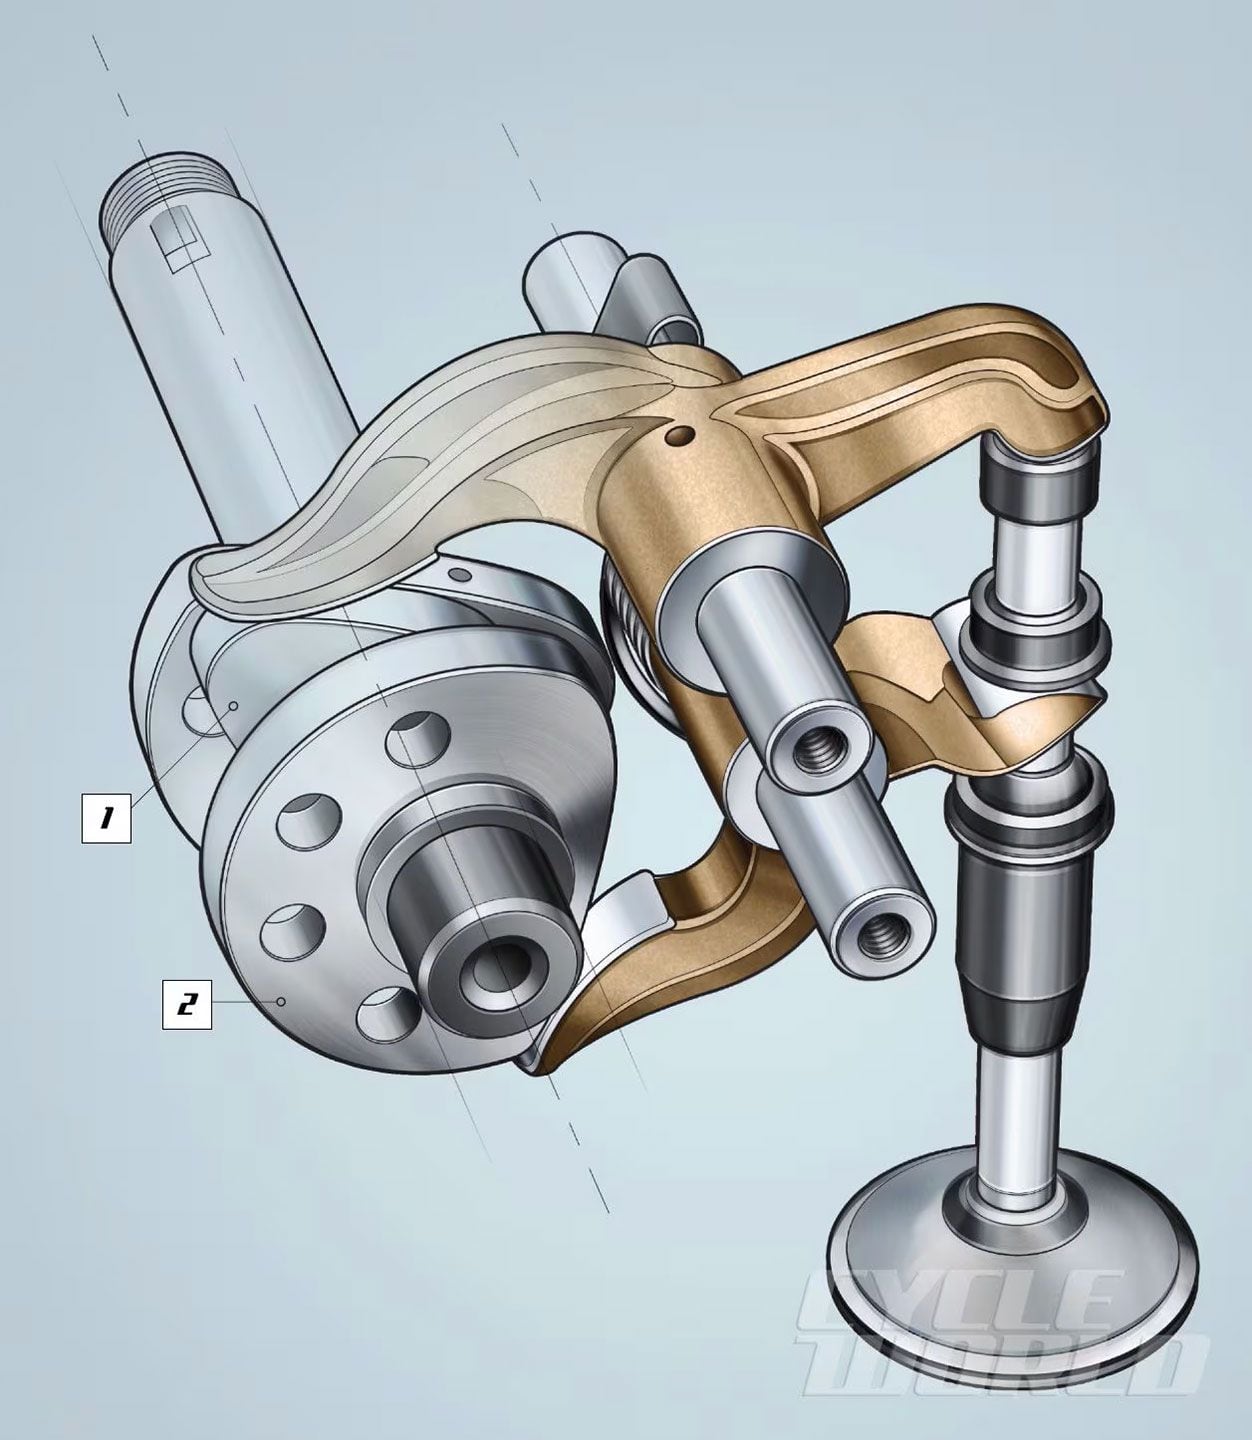 This is desmodromic valve operation from Ducati’s classic two-valve-per-cylinder engines (four-valve is identical in theory). Cam lobe 1 opens the valve and cam lobe 2 closes the valve. Barely shown are light “helper” springs—the coils can be seen on the lower shaft closer rocker arm. This aids start and idle by holding the valve more positively to the seat.